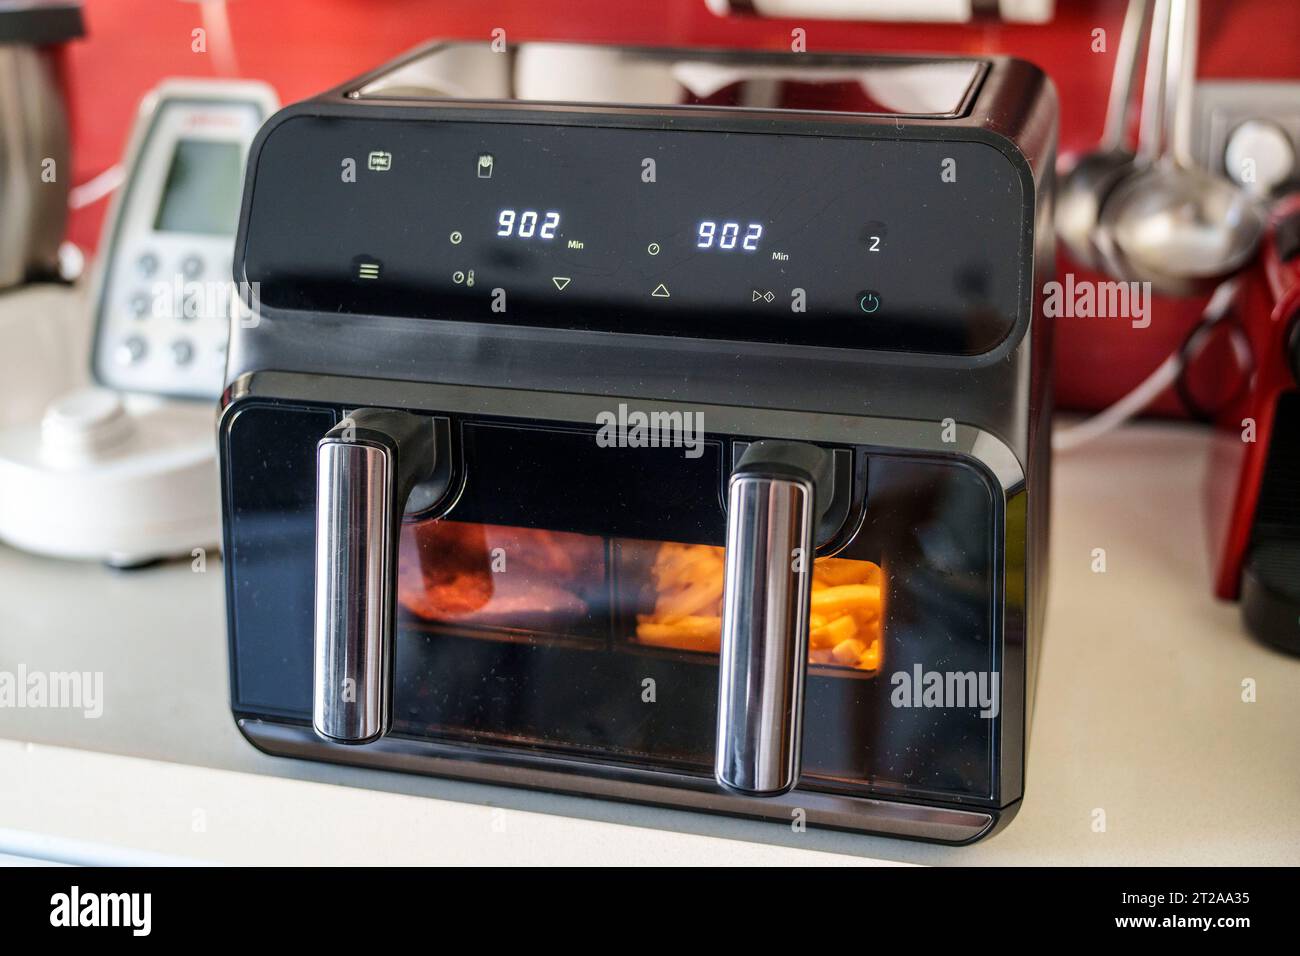 Large double tray air fryer on a kitchen countertop Stock Photo